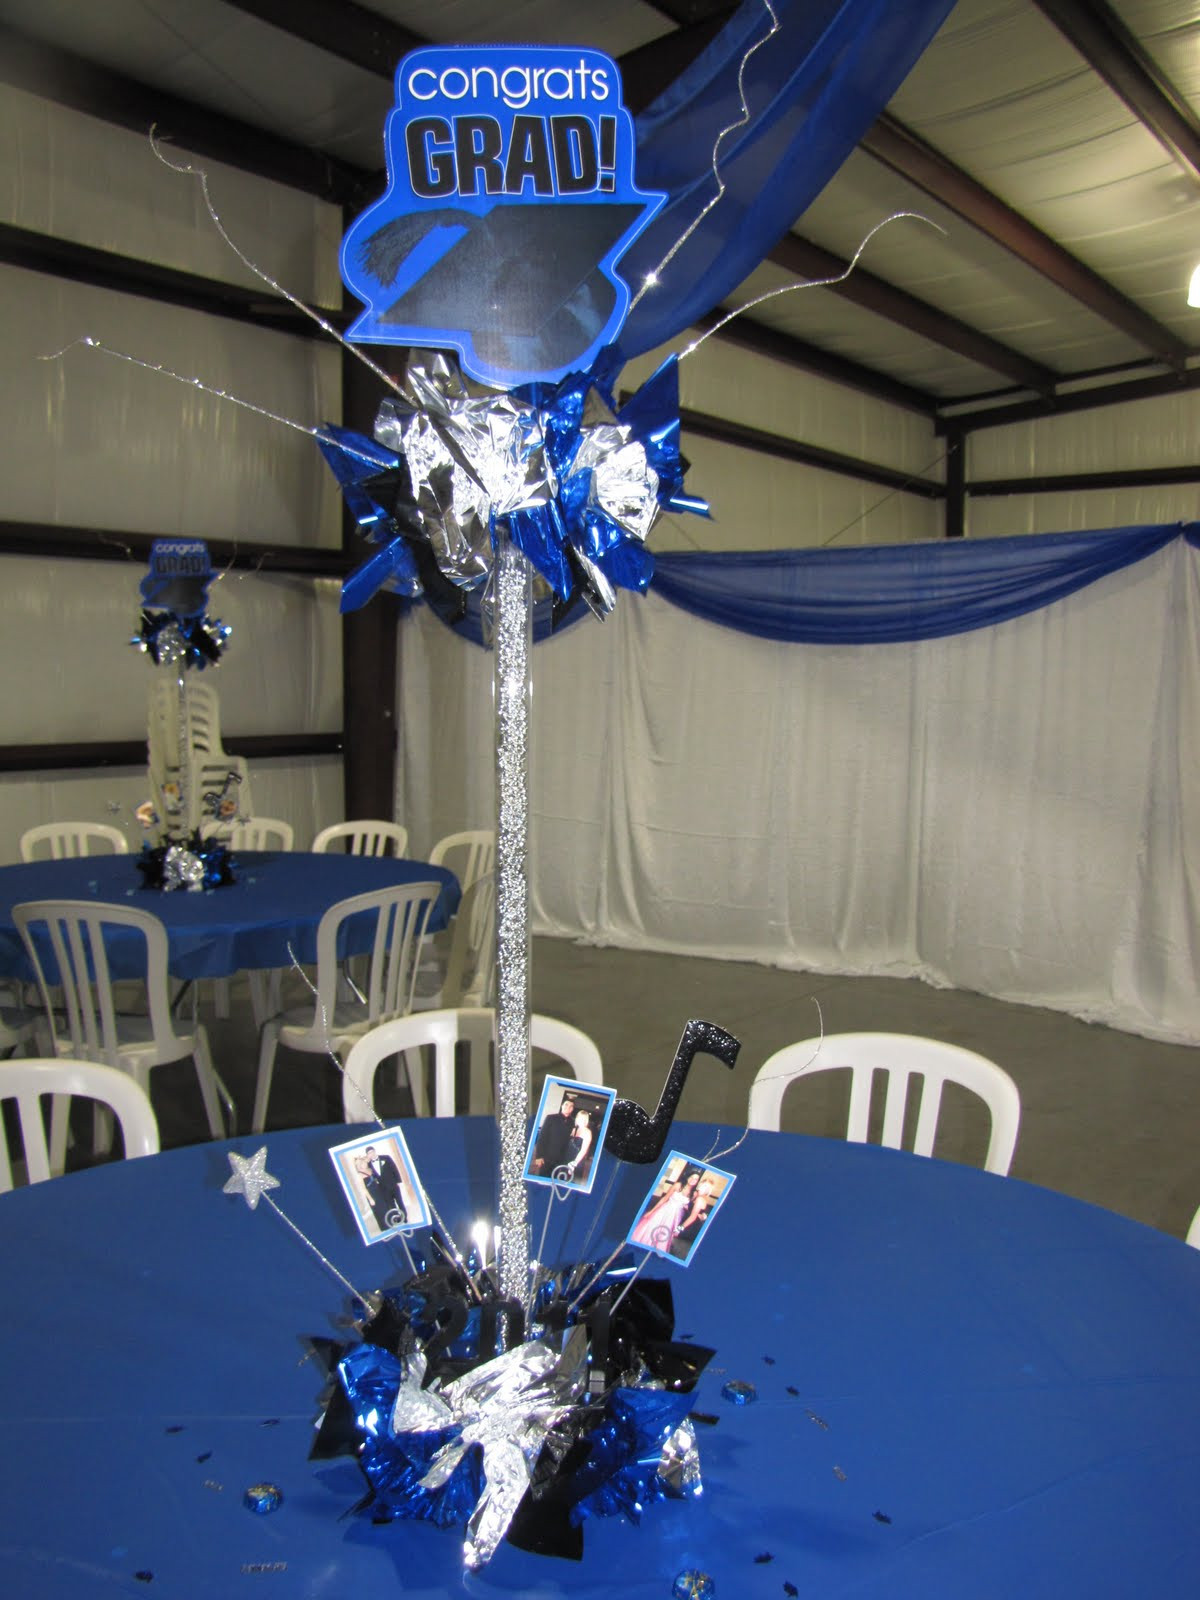 Graduation Party Centerpieces Ideas
 Party People Event Decorating pany Stephanie s